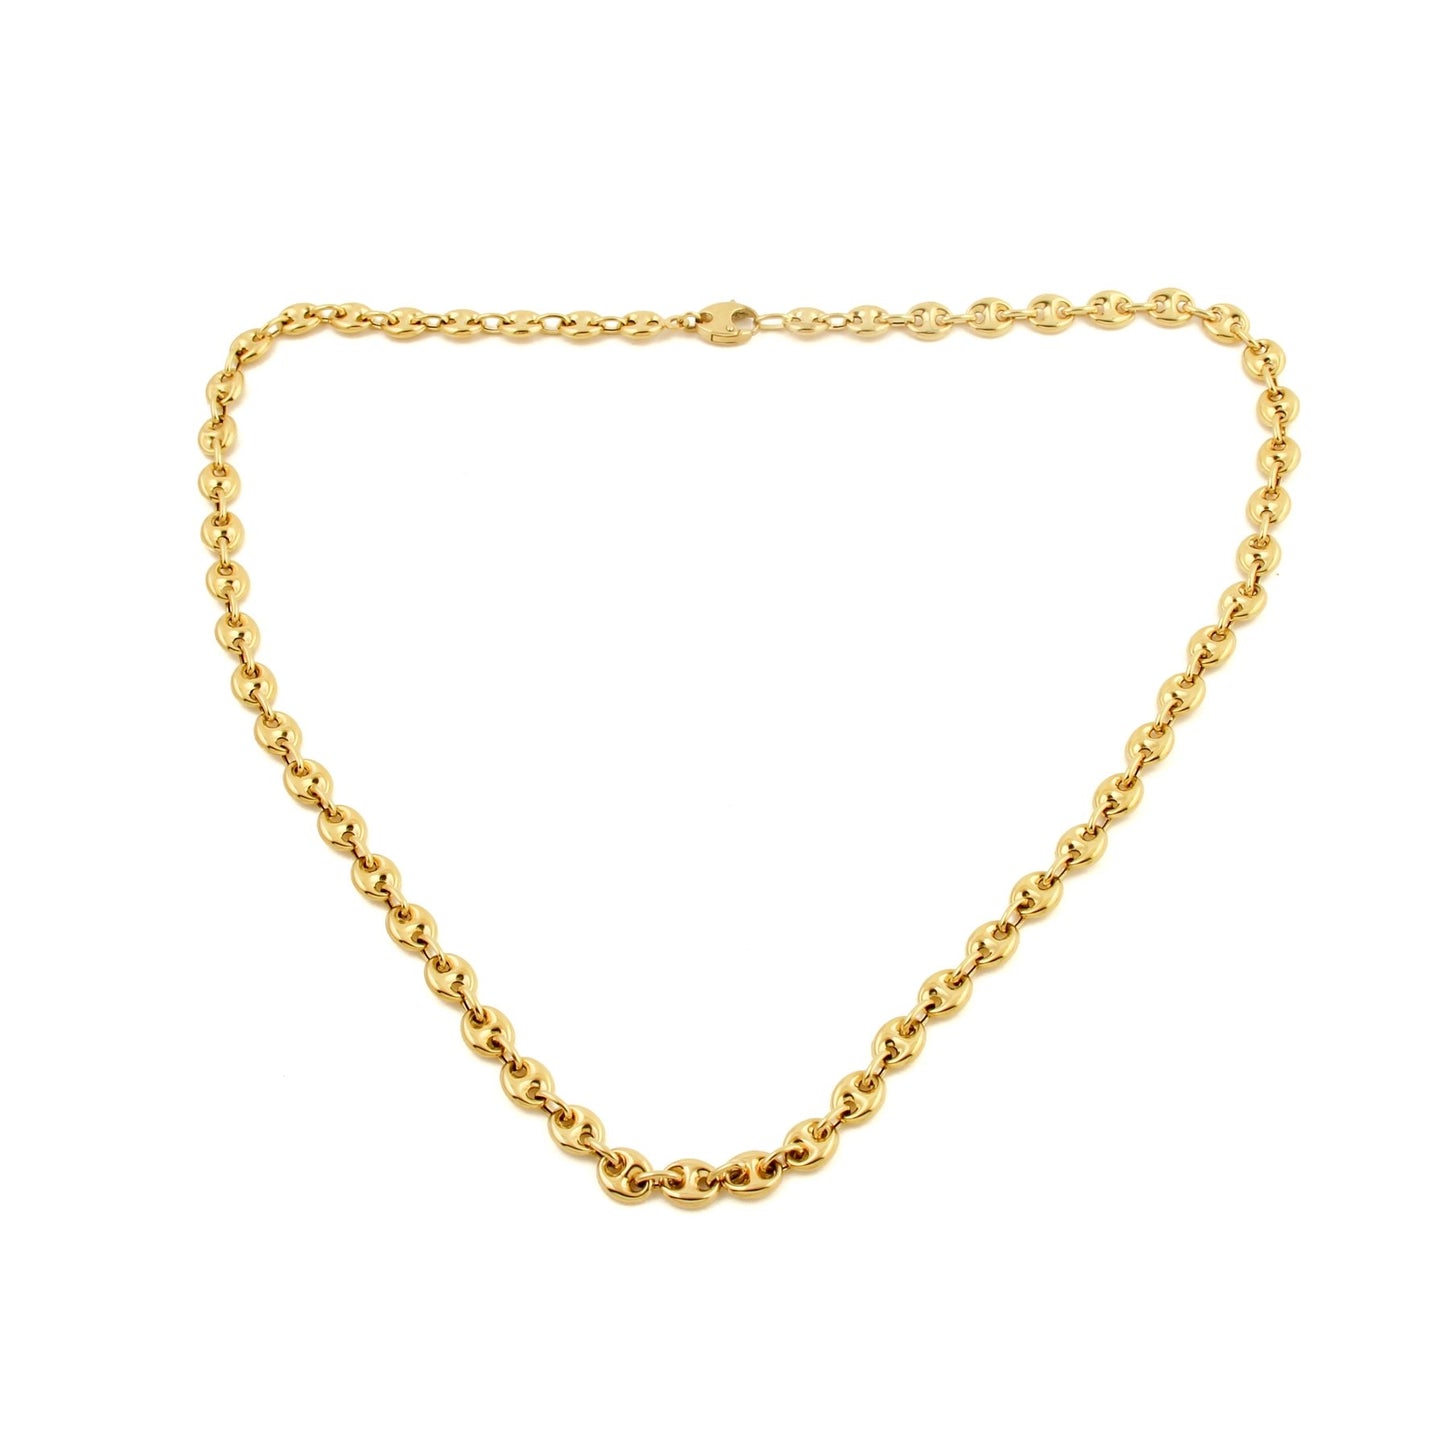 14k Gold Contemporary Gucci Link Necklace - Kingdom Jewelry